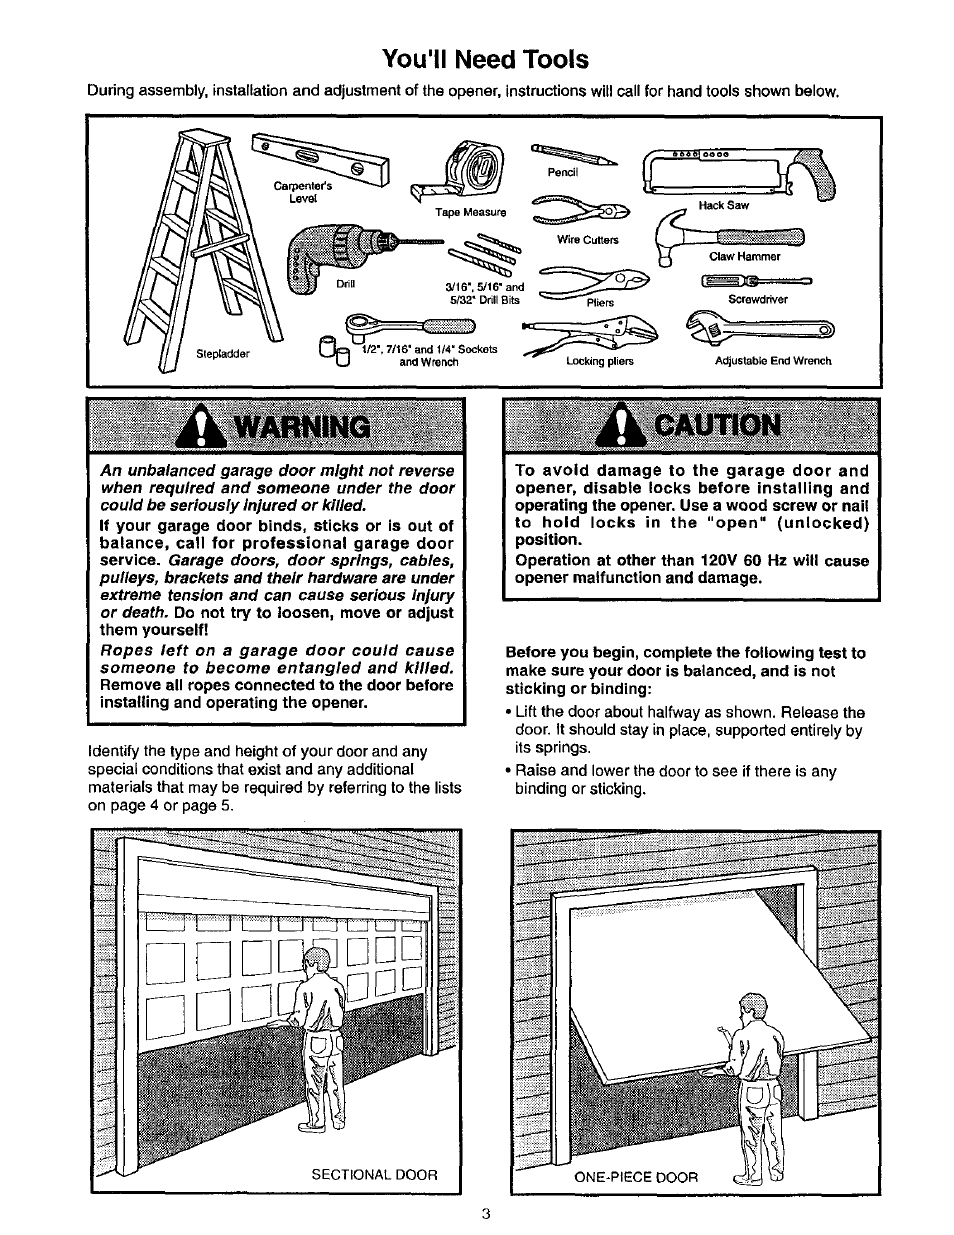 You'll need tools | Craftsman 139.53975SRT User Manual | Page 3 / 40